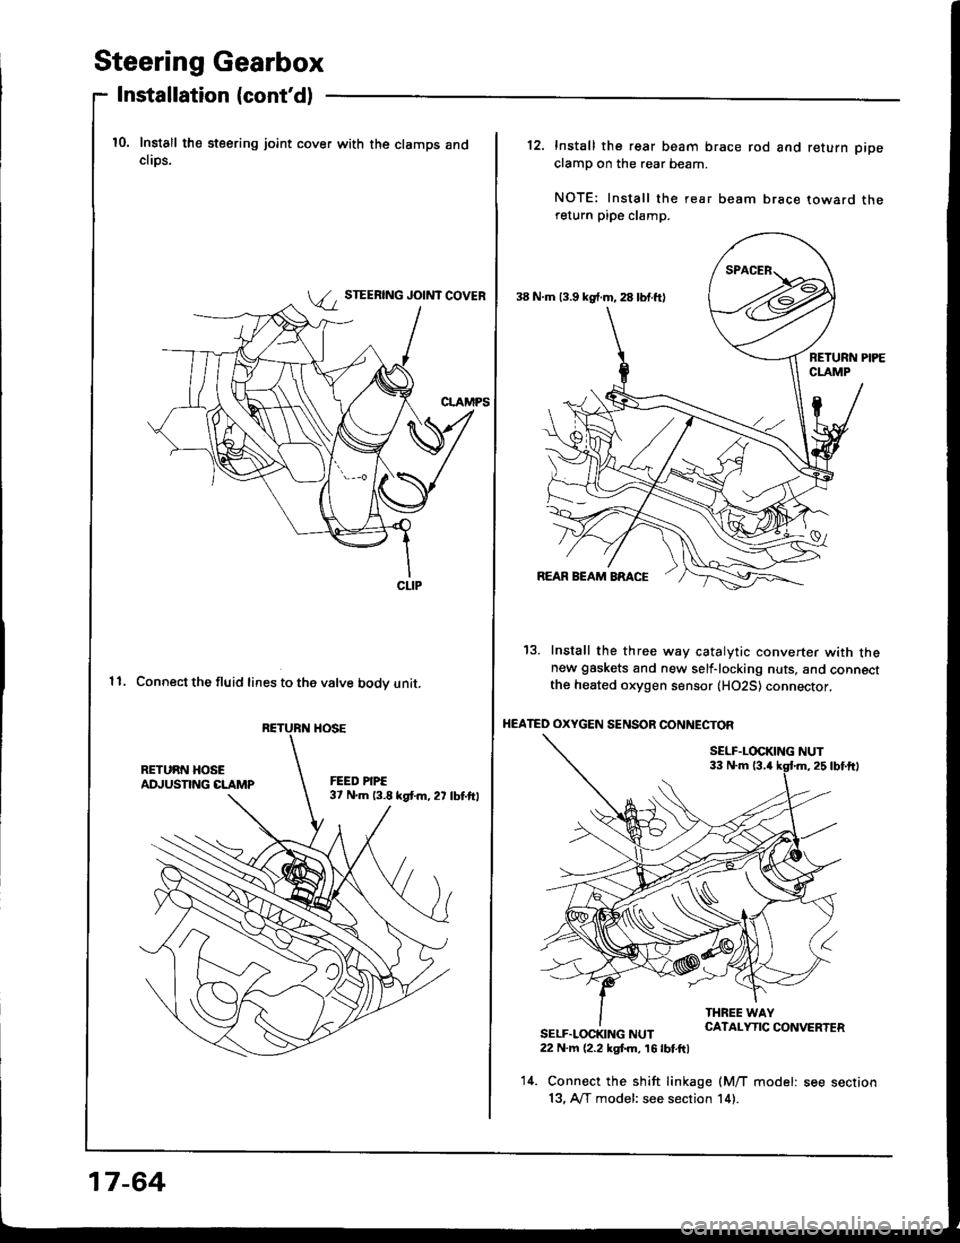 HONDA INTEGRA 1994 4.G Workshop Manual Steering Gearbox
Installation (contd)
10. Install the steering joint cover with the clamps andcliDs.
STEERING JOINT COVER
11. Connect the fluid lines to the valve bodv unit.
CLIP
RETURN HOSE
17-64
38